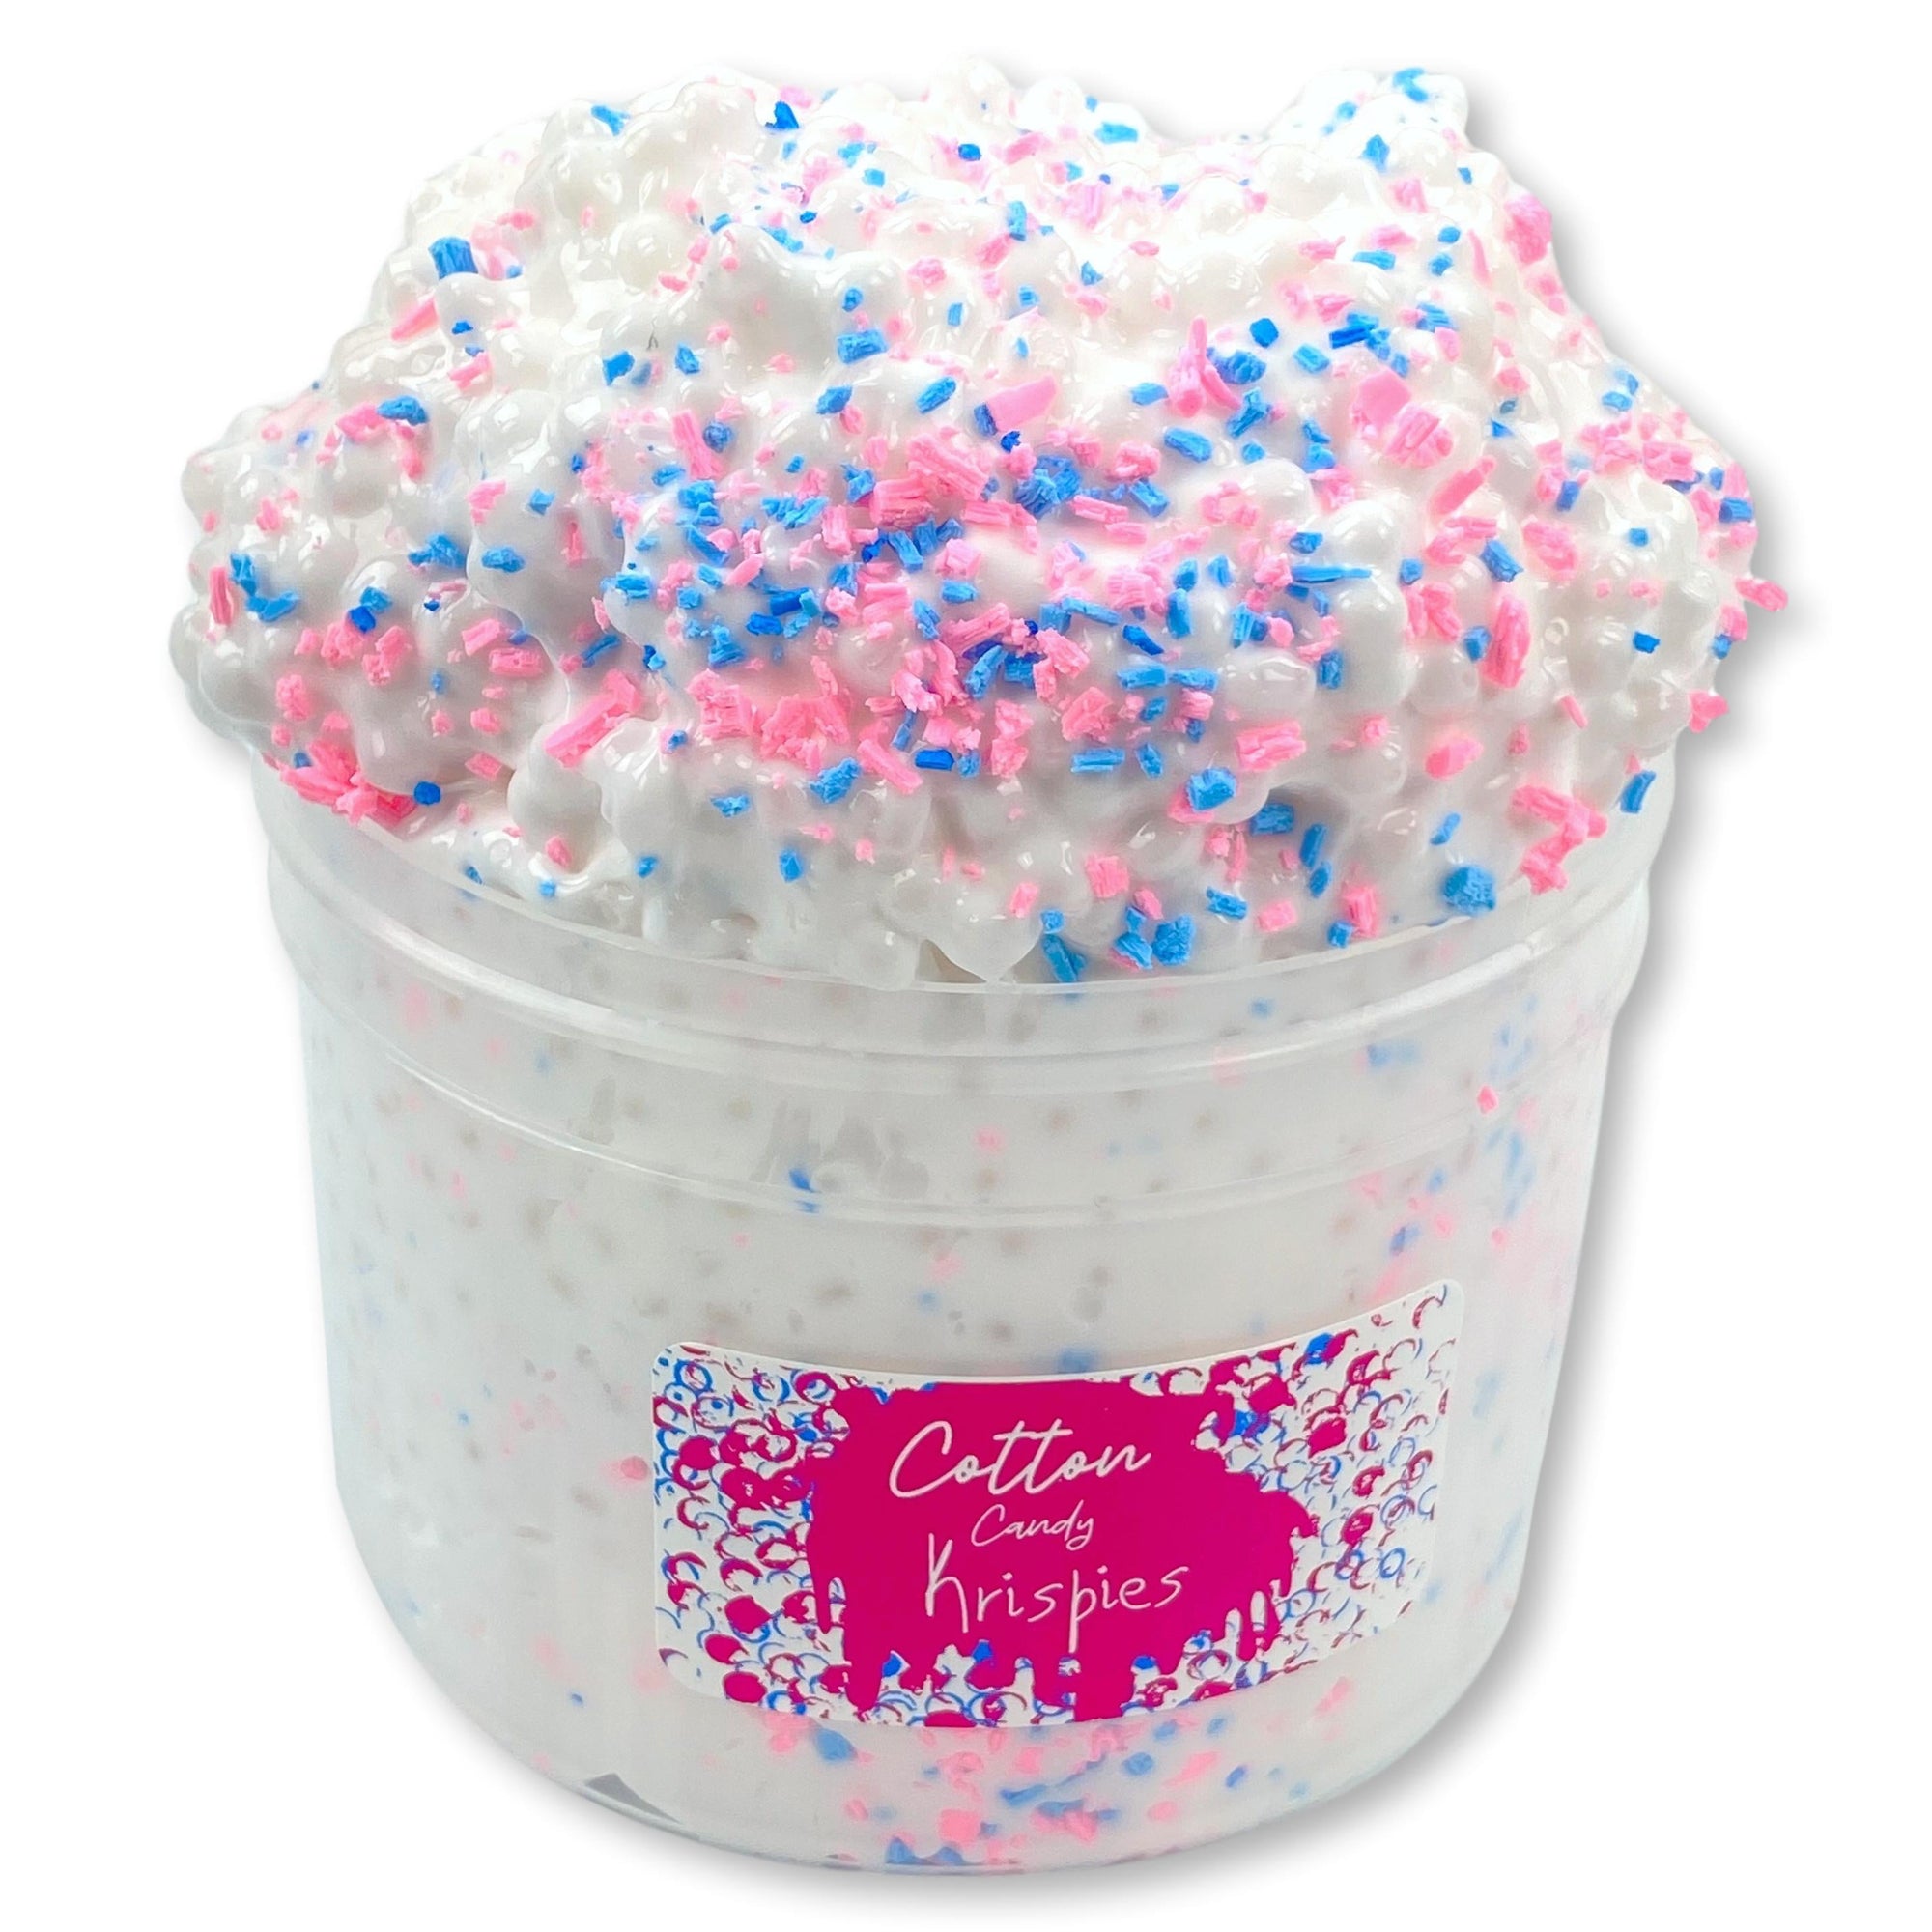 Cotton Candy Krispies Scented Slime - Shop Slime - Dope SlimesCotton Candy Krispies Scented Slime - Shop Slime - Dope Slimes